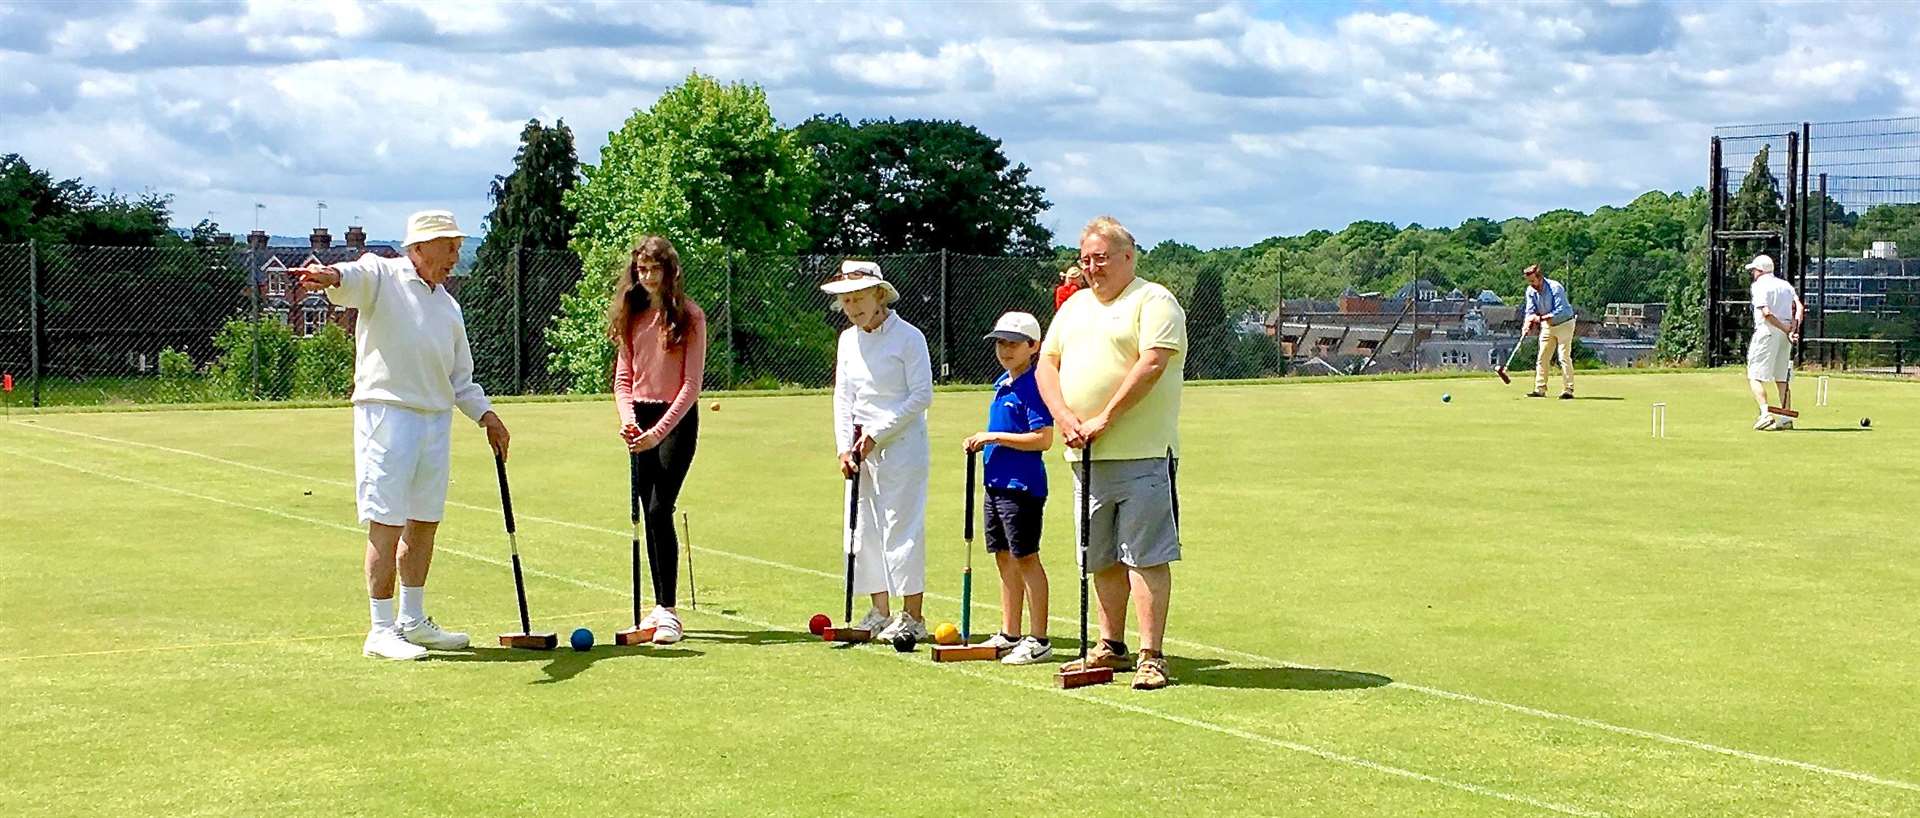 Croquet: A sport for young and old. Lessons in the sport at the Royal Tunbridge Wells Croquet Club